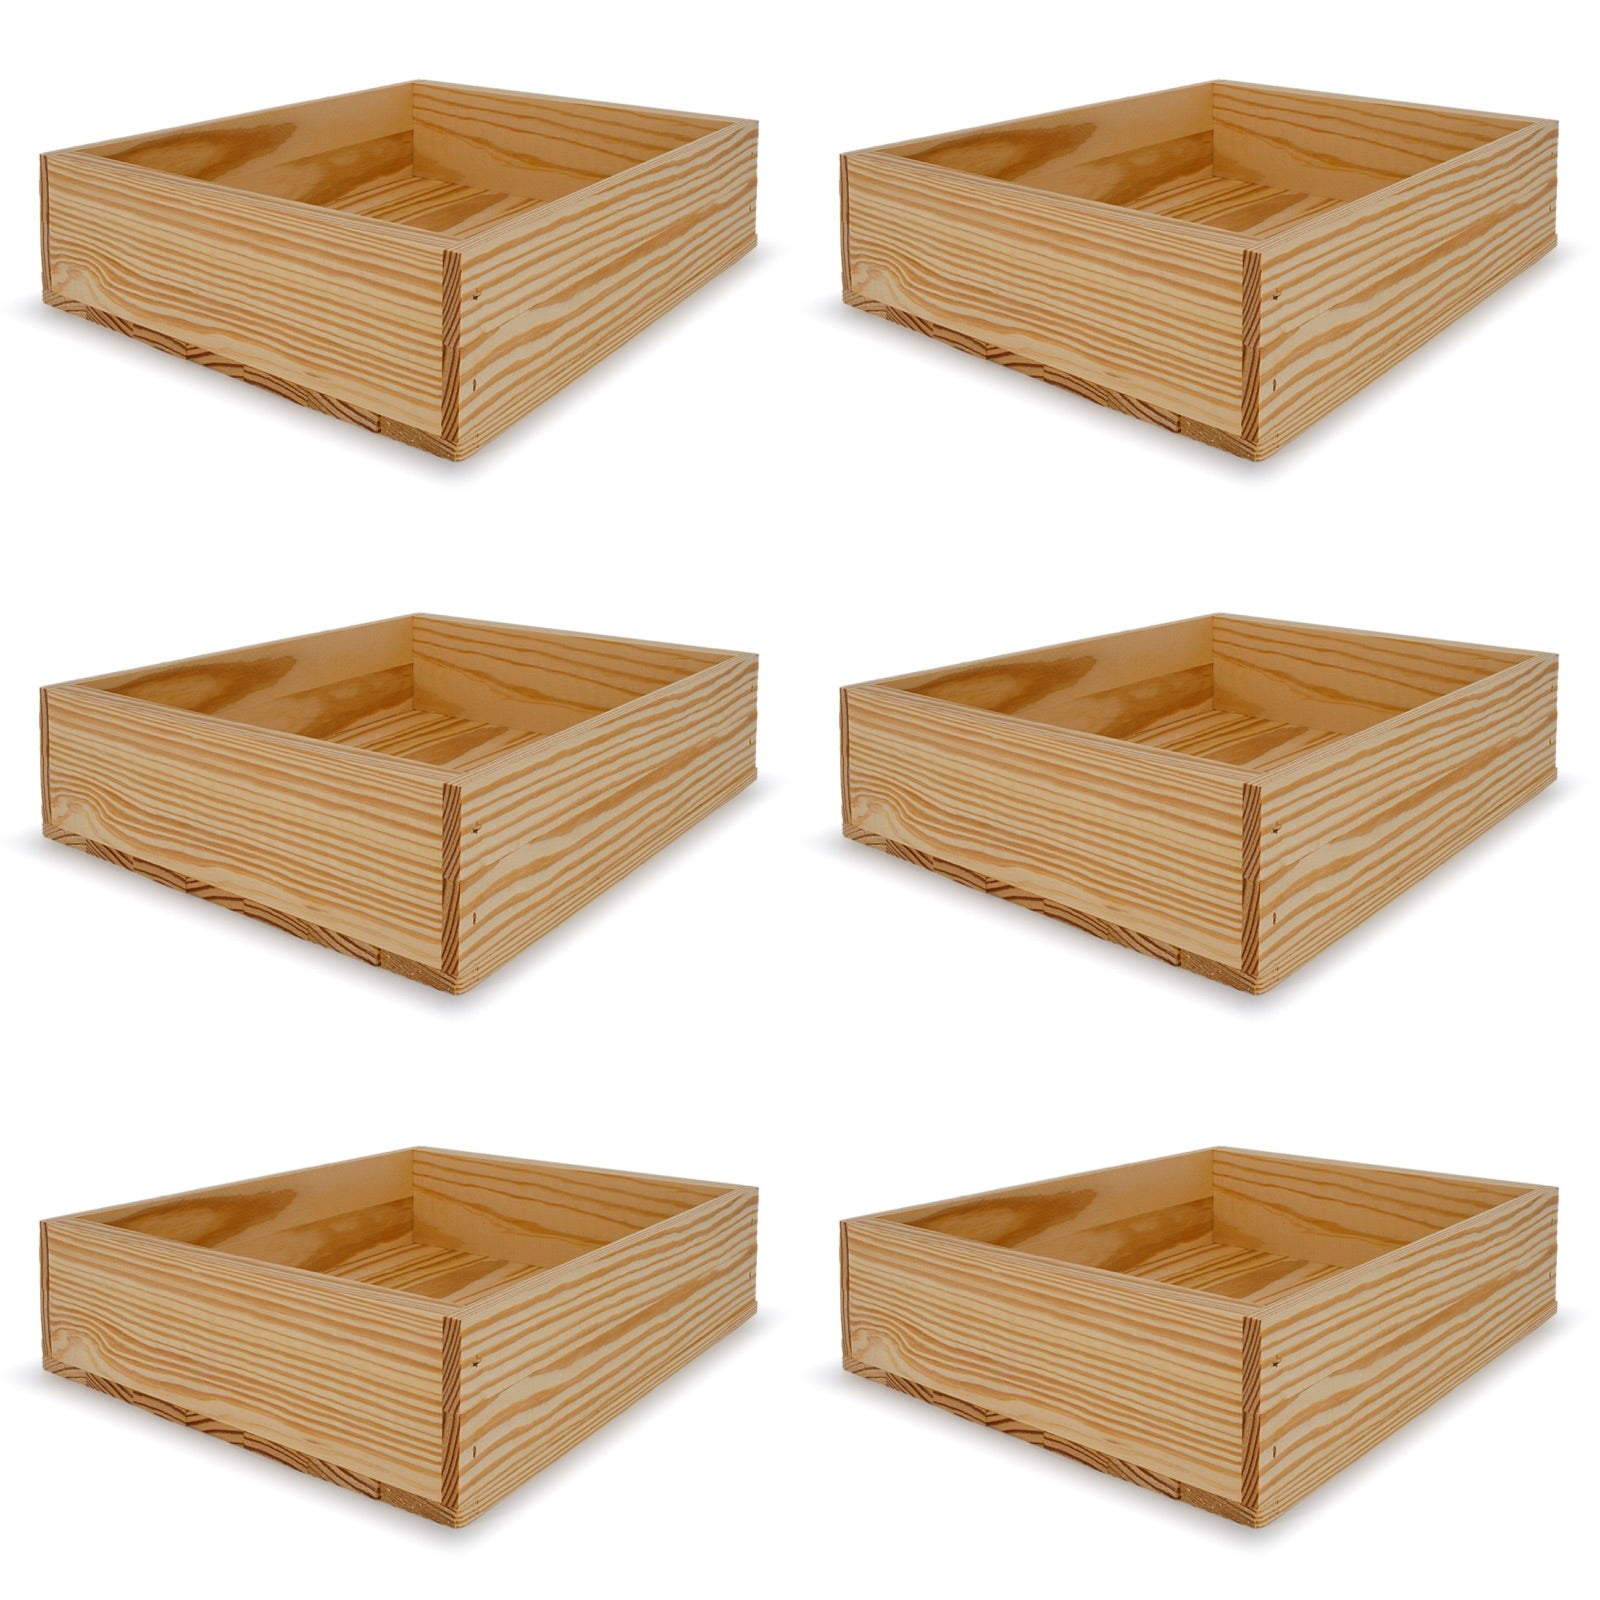 Small Wooden Crate Boxes 14 x 11 1/2 x 3 1/2 – Carpenter Core